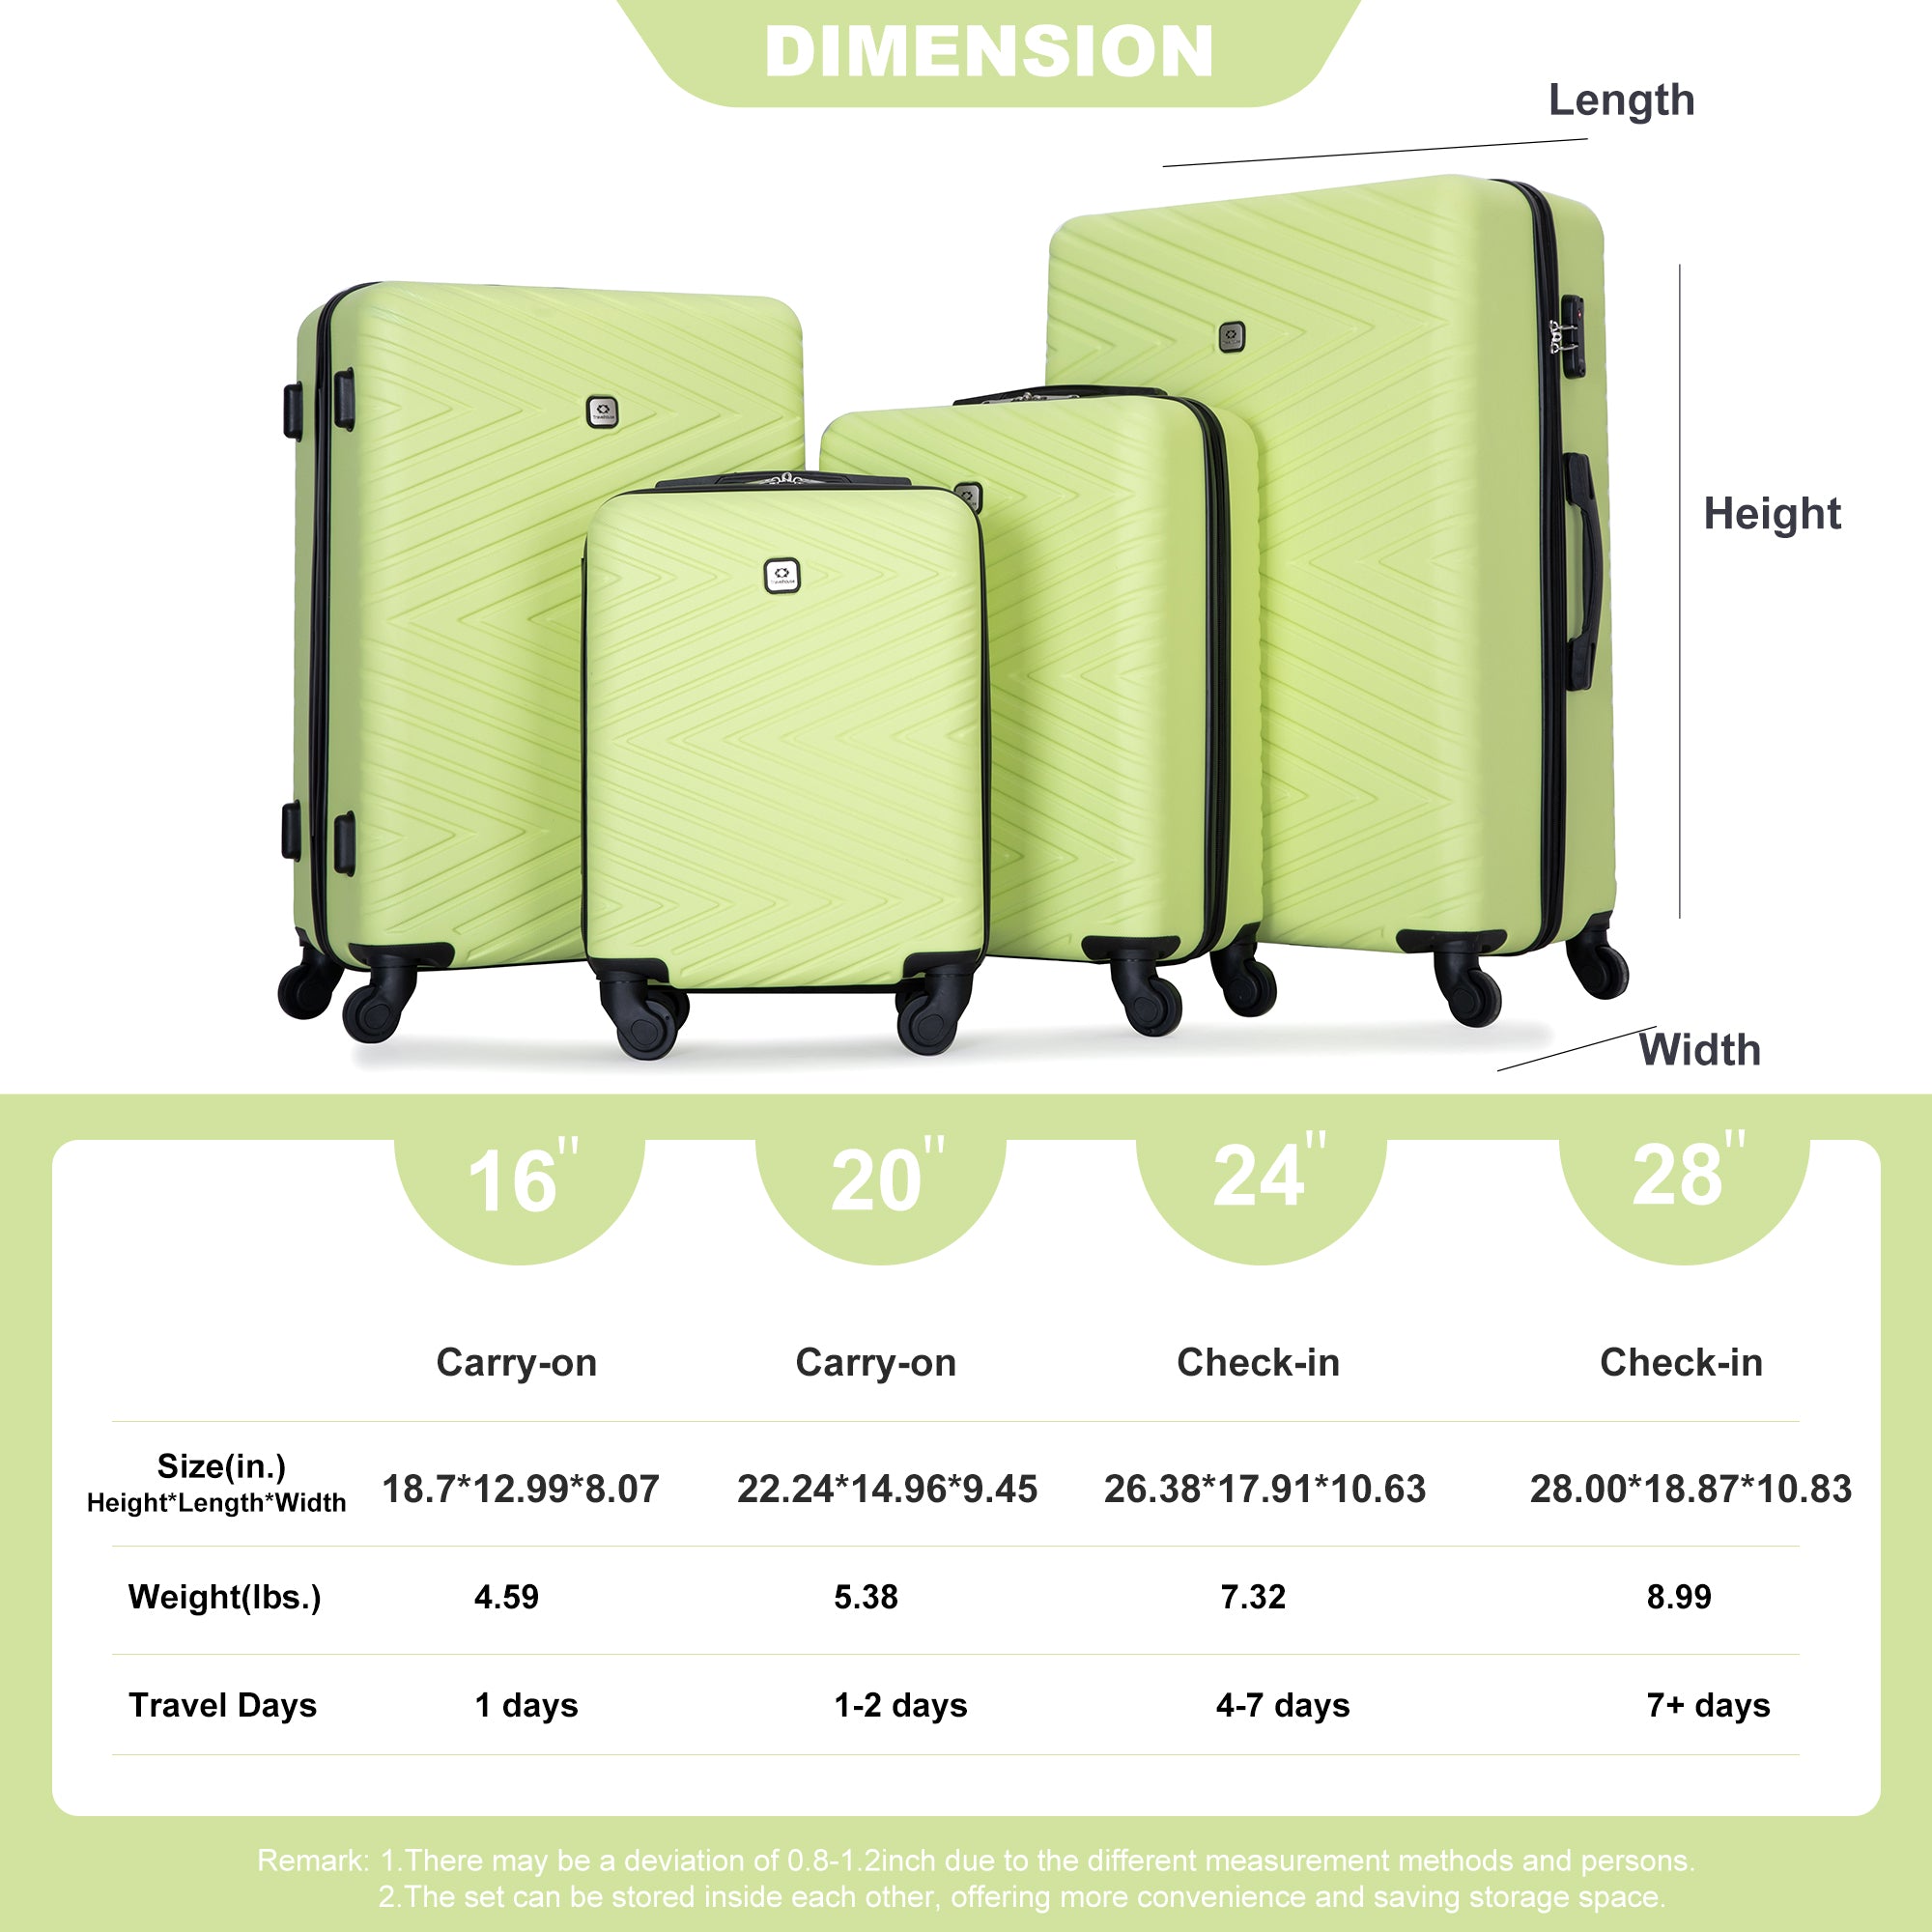 luggage 4 piece ABS lightweight suitcase with rotating fluorescent green-abs